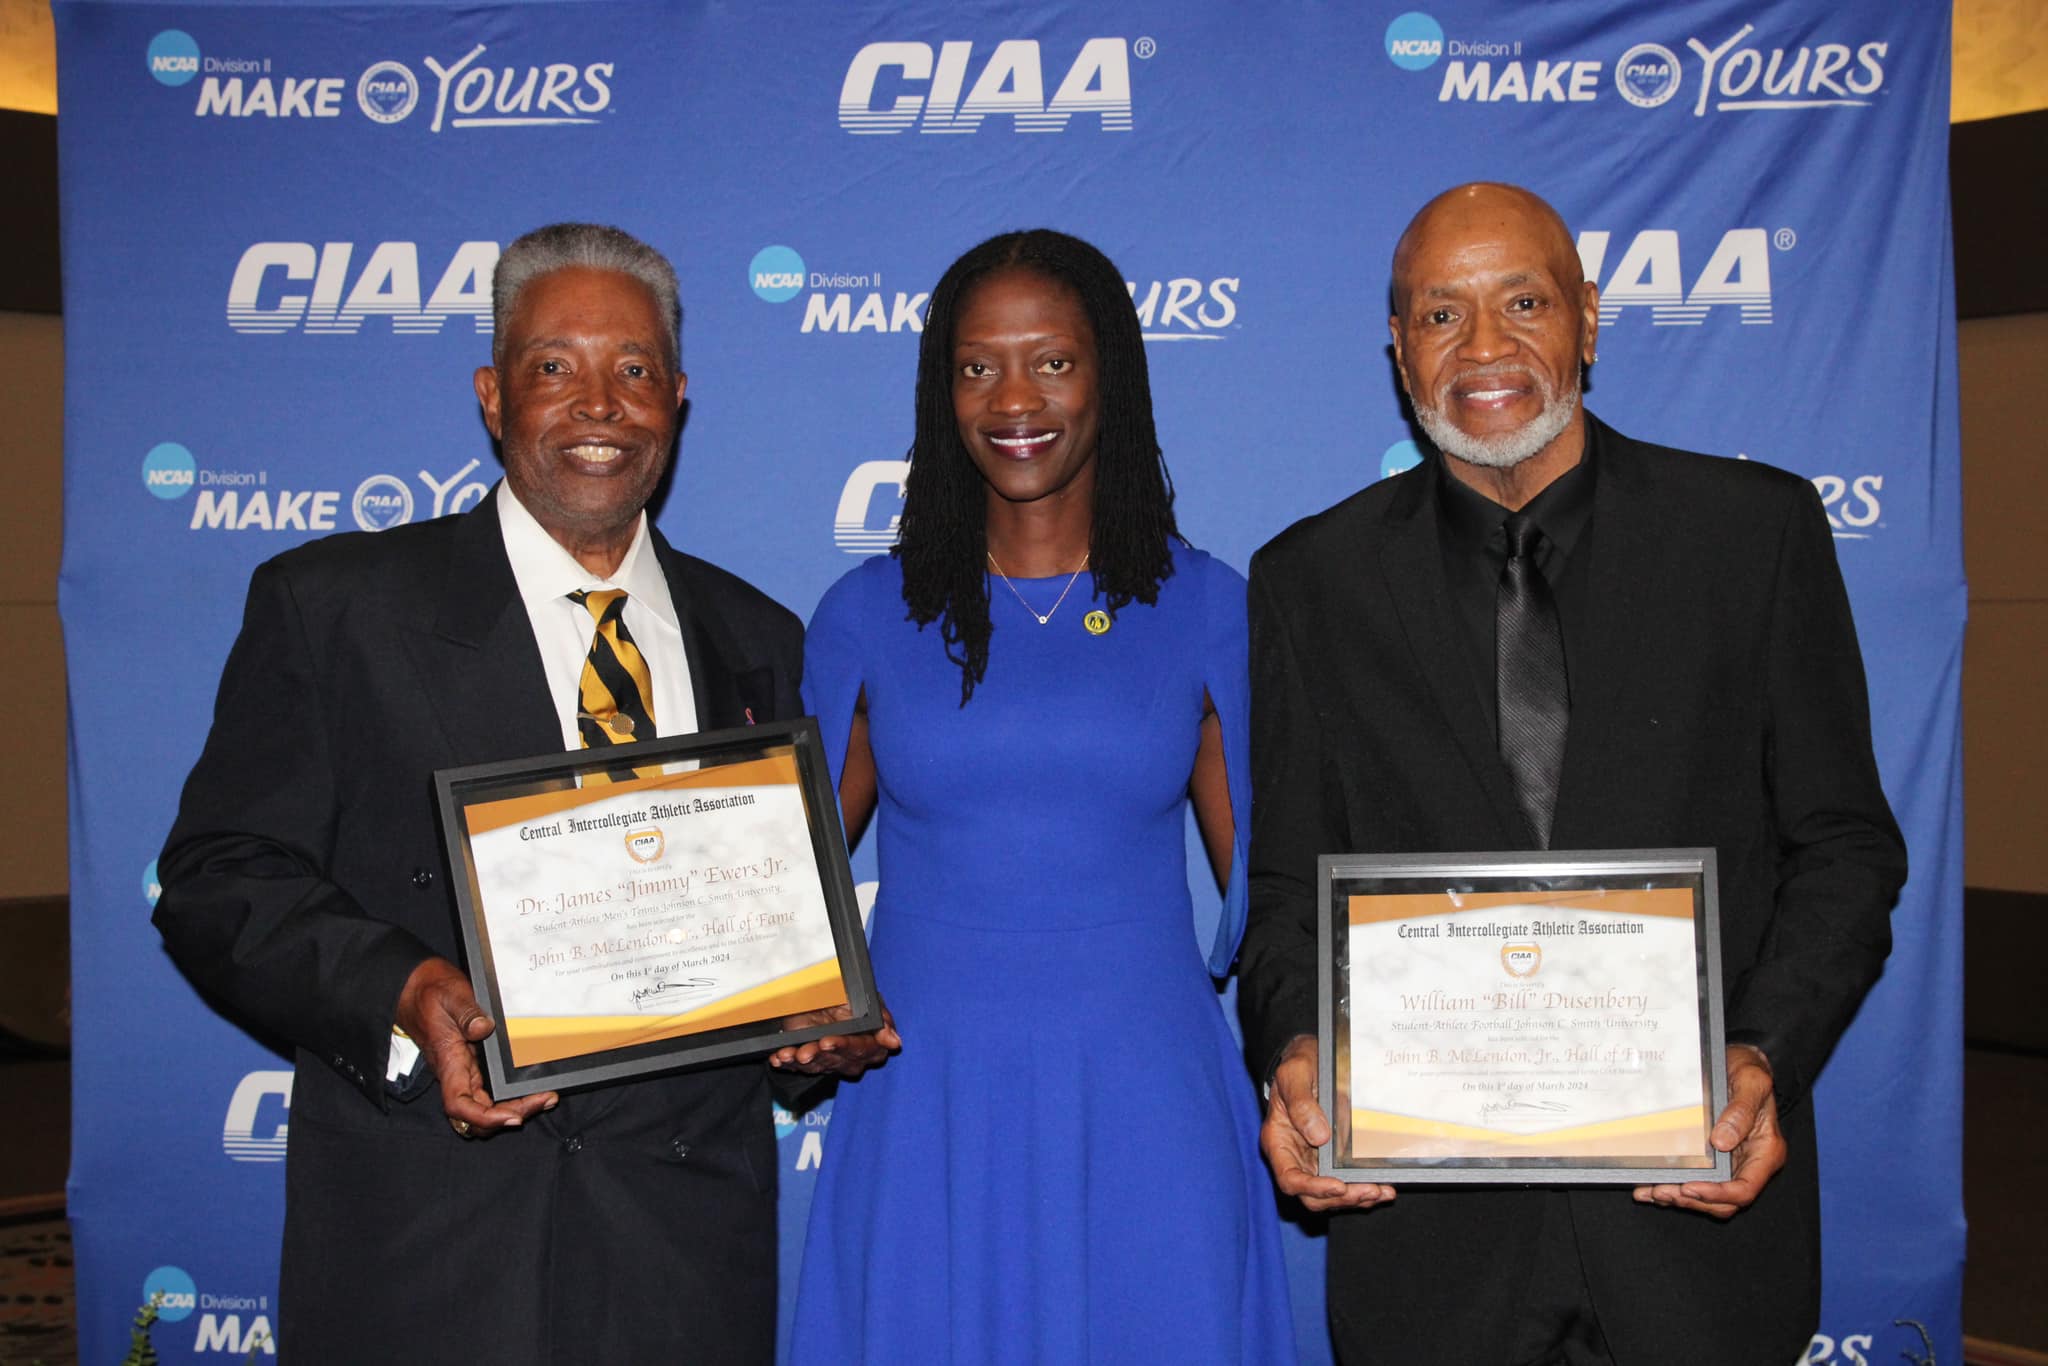 Dr. James "Jimmy" Ewers, Dr. Valerie Kinloch and William Bill Dusenberry at the 2024 CIAA Hall of Fame Induction Ceremony